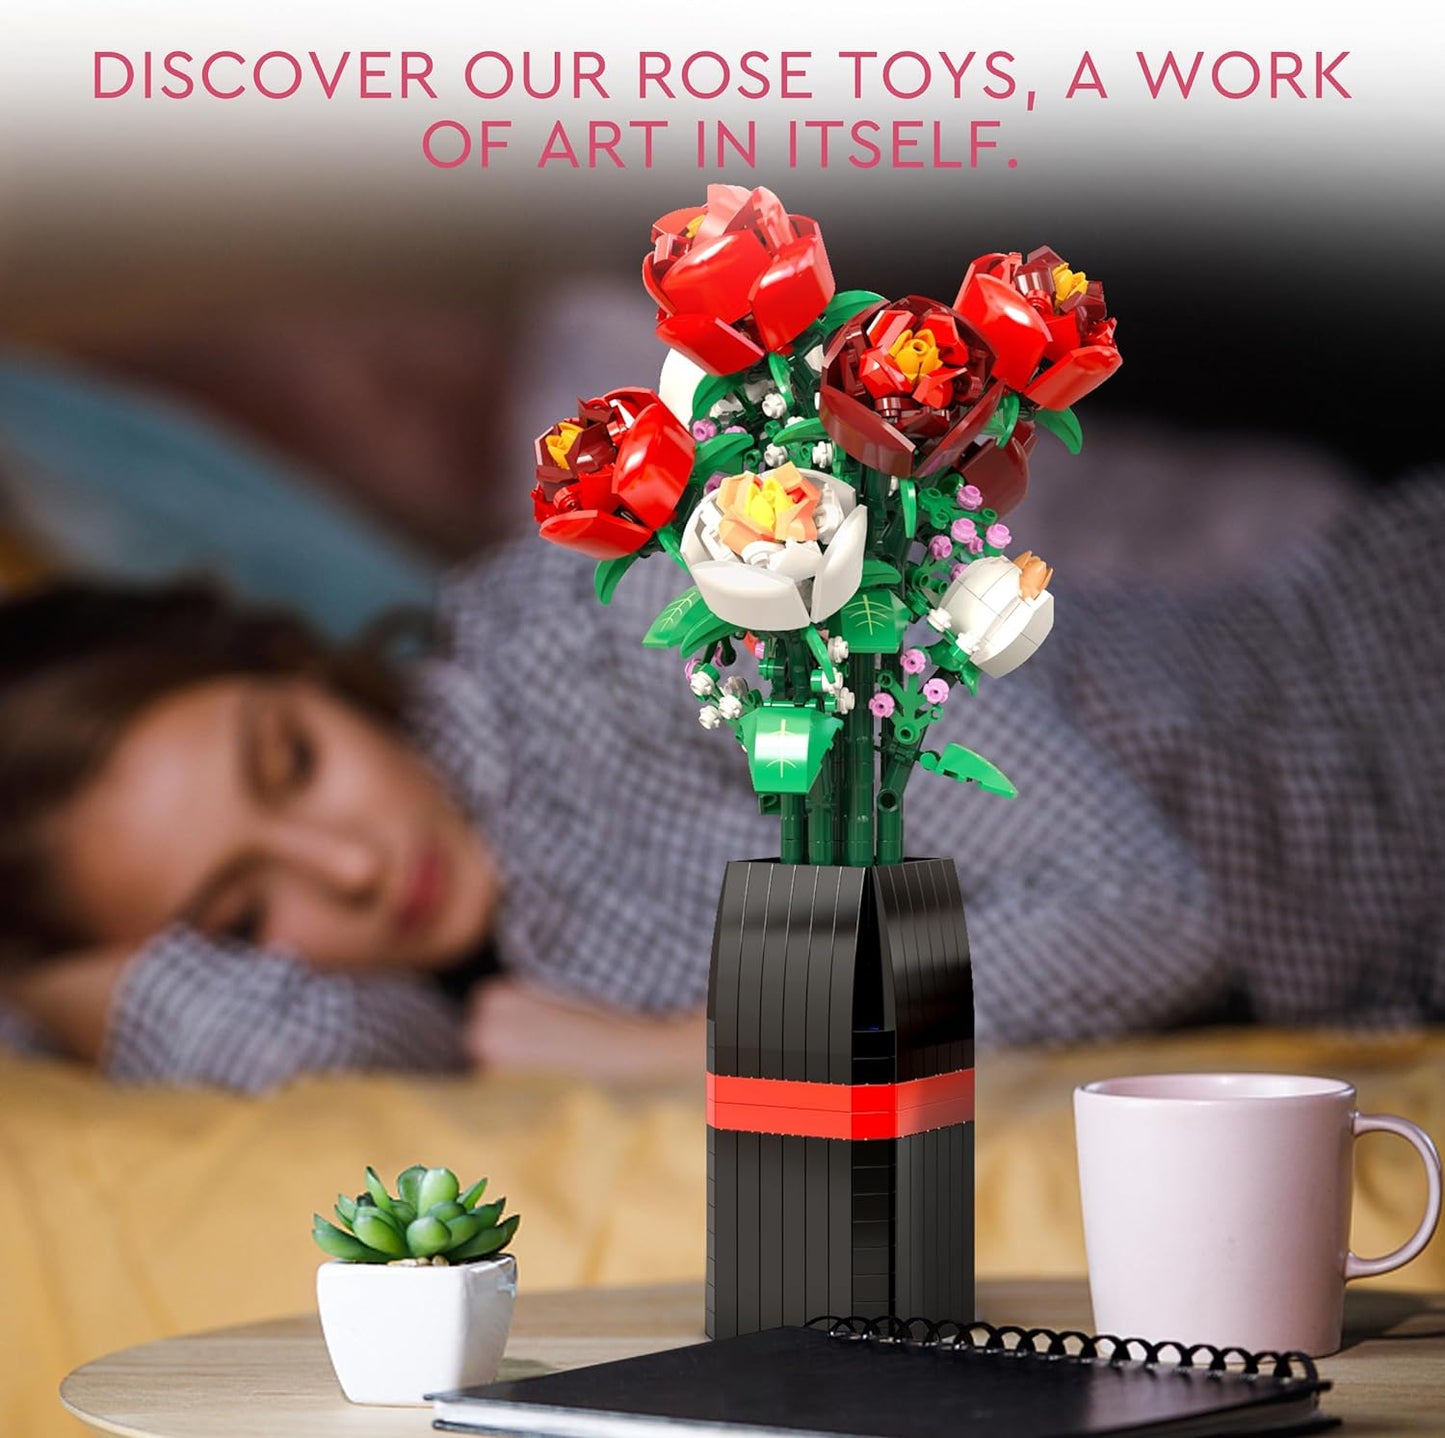 Flowers Bouquet Building Set (818 PCS) - Christmas, Mother's Day, or Valentine's Gifts Ideal for Kids, Women,Girls and Boys, Roses Toy Building Set with Vase